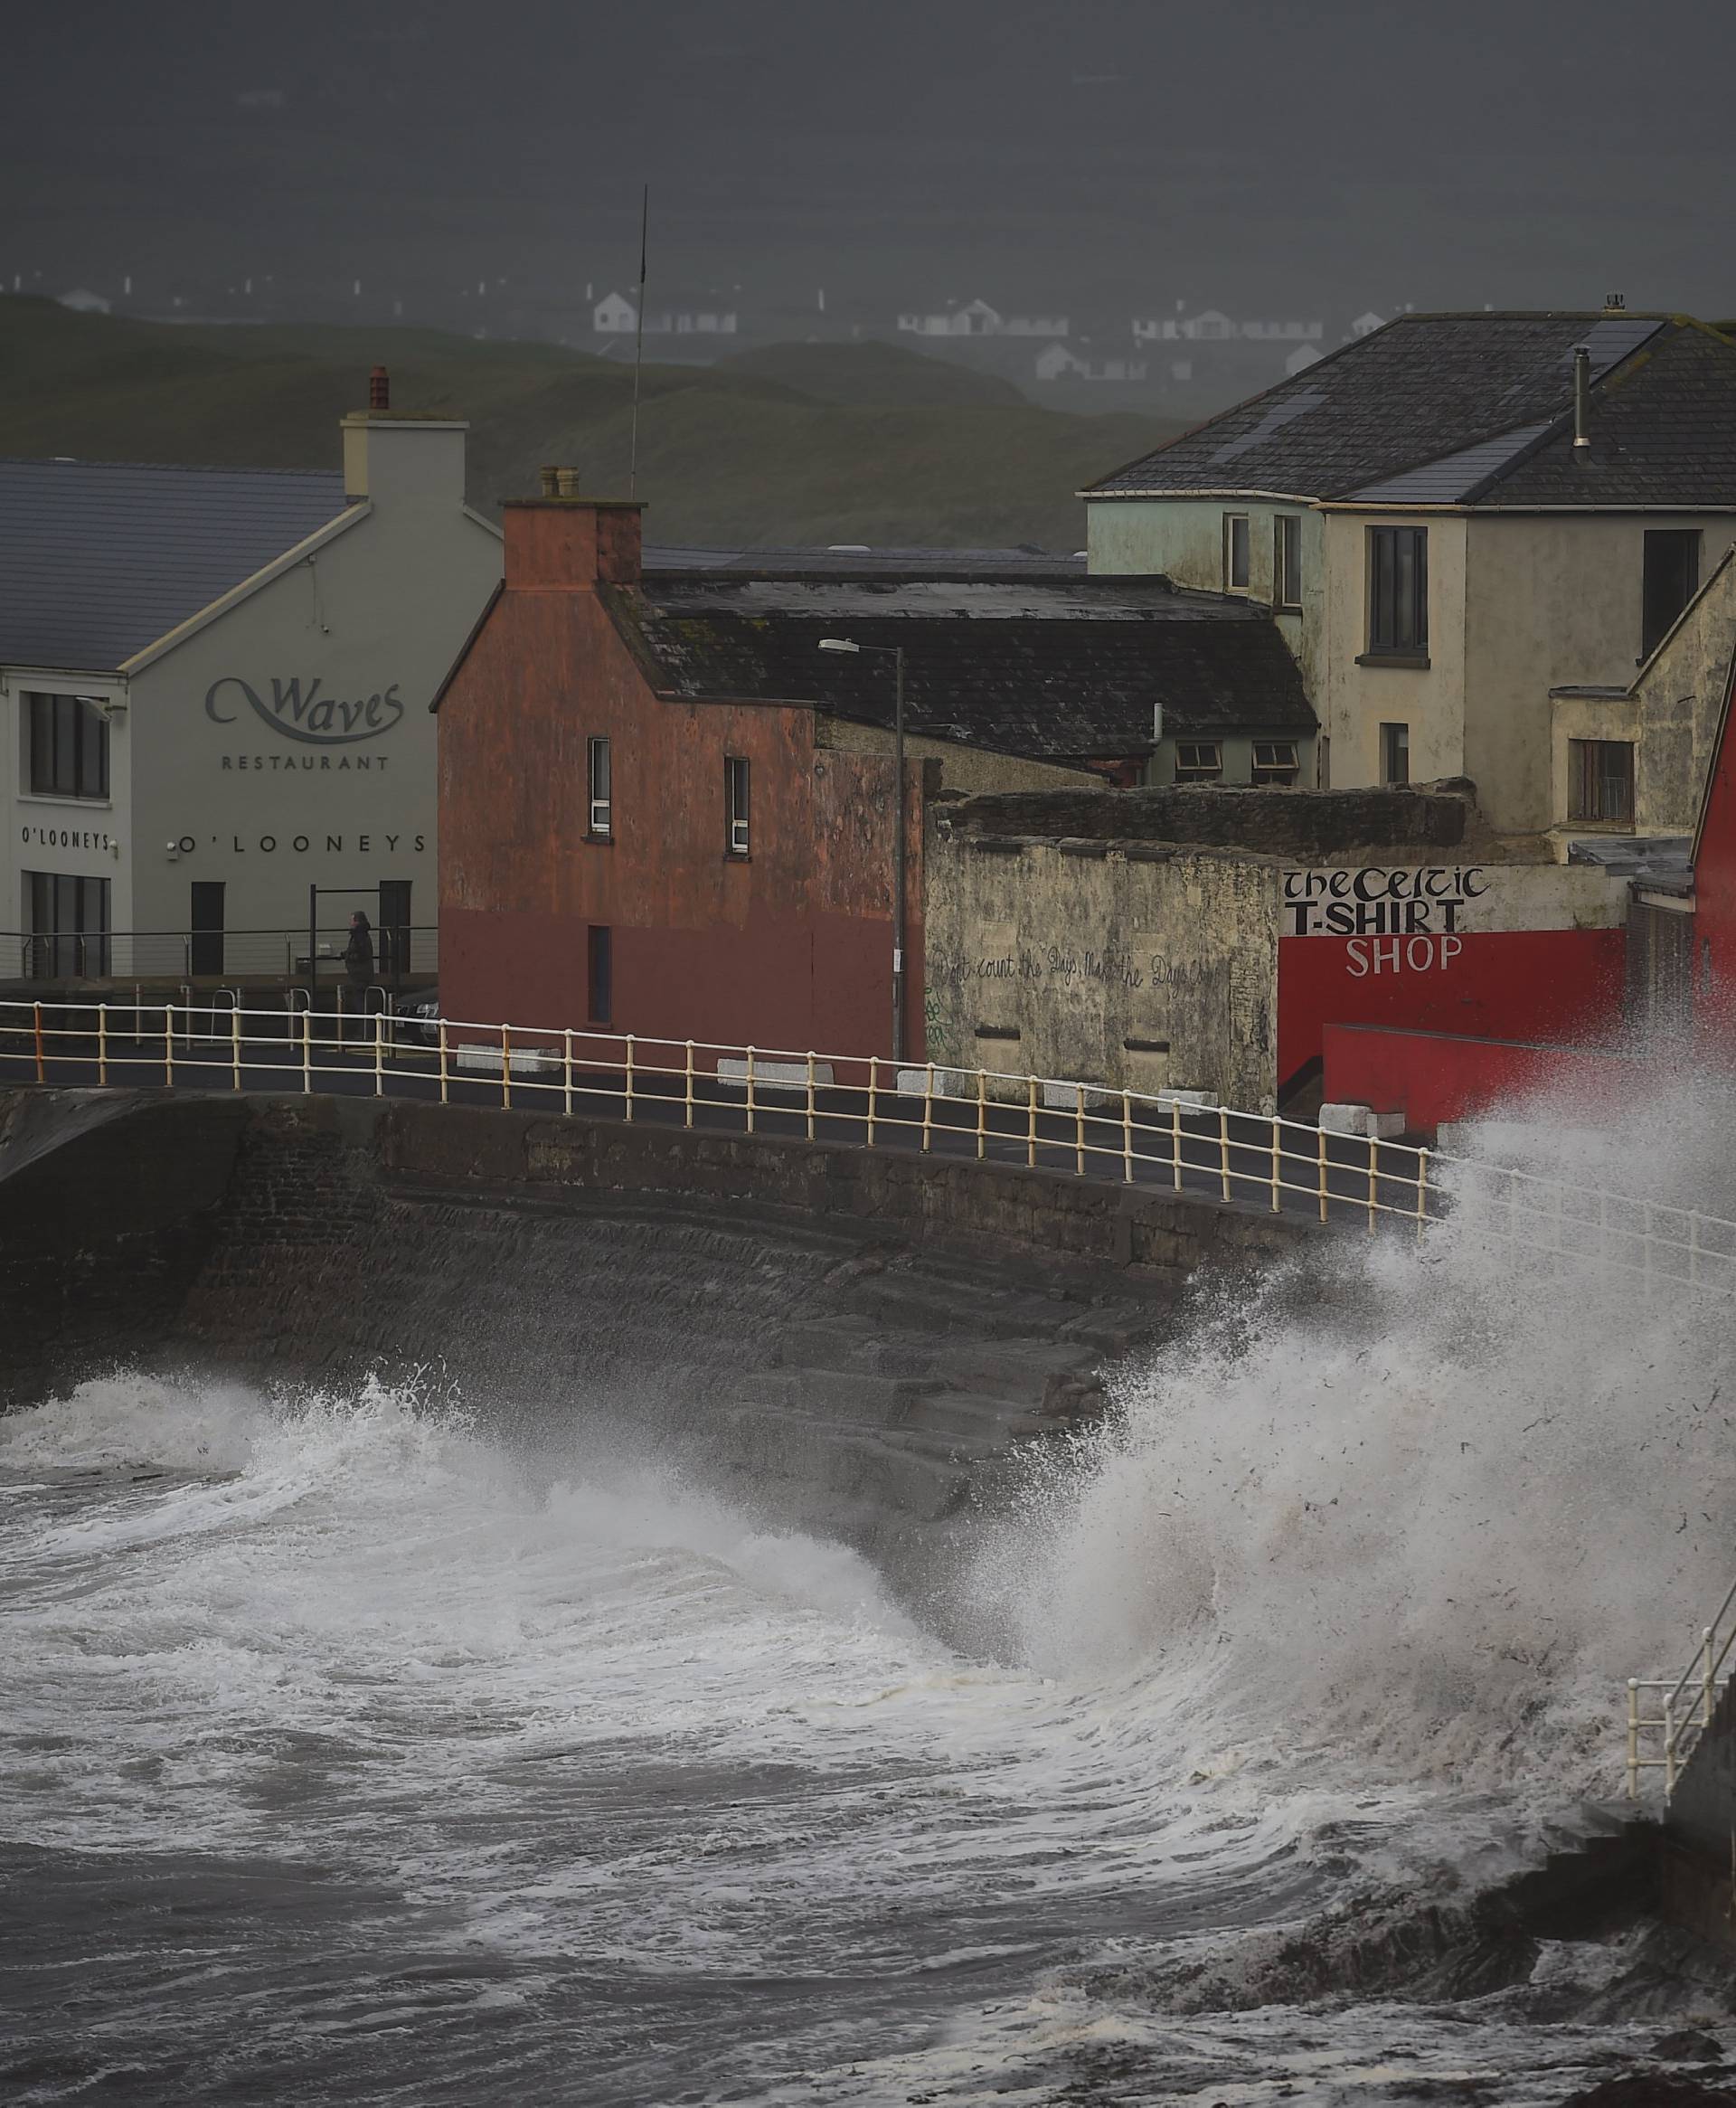 Winds batter the coast as storm Ophelia hits the County Clare town of Lahinch